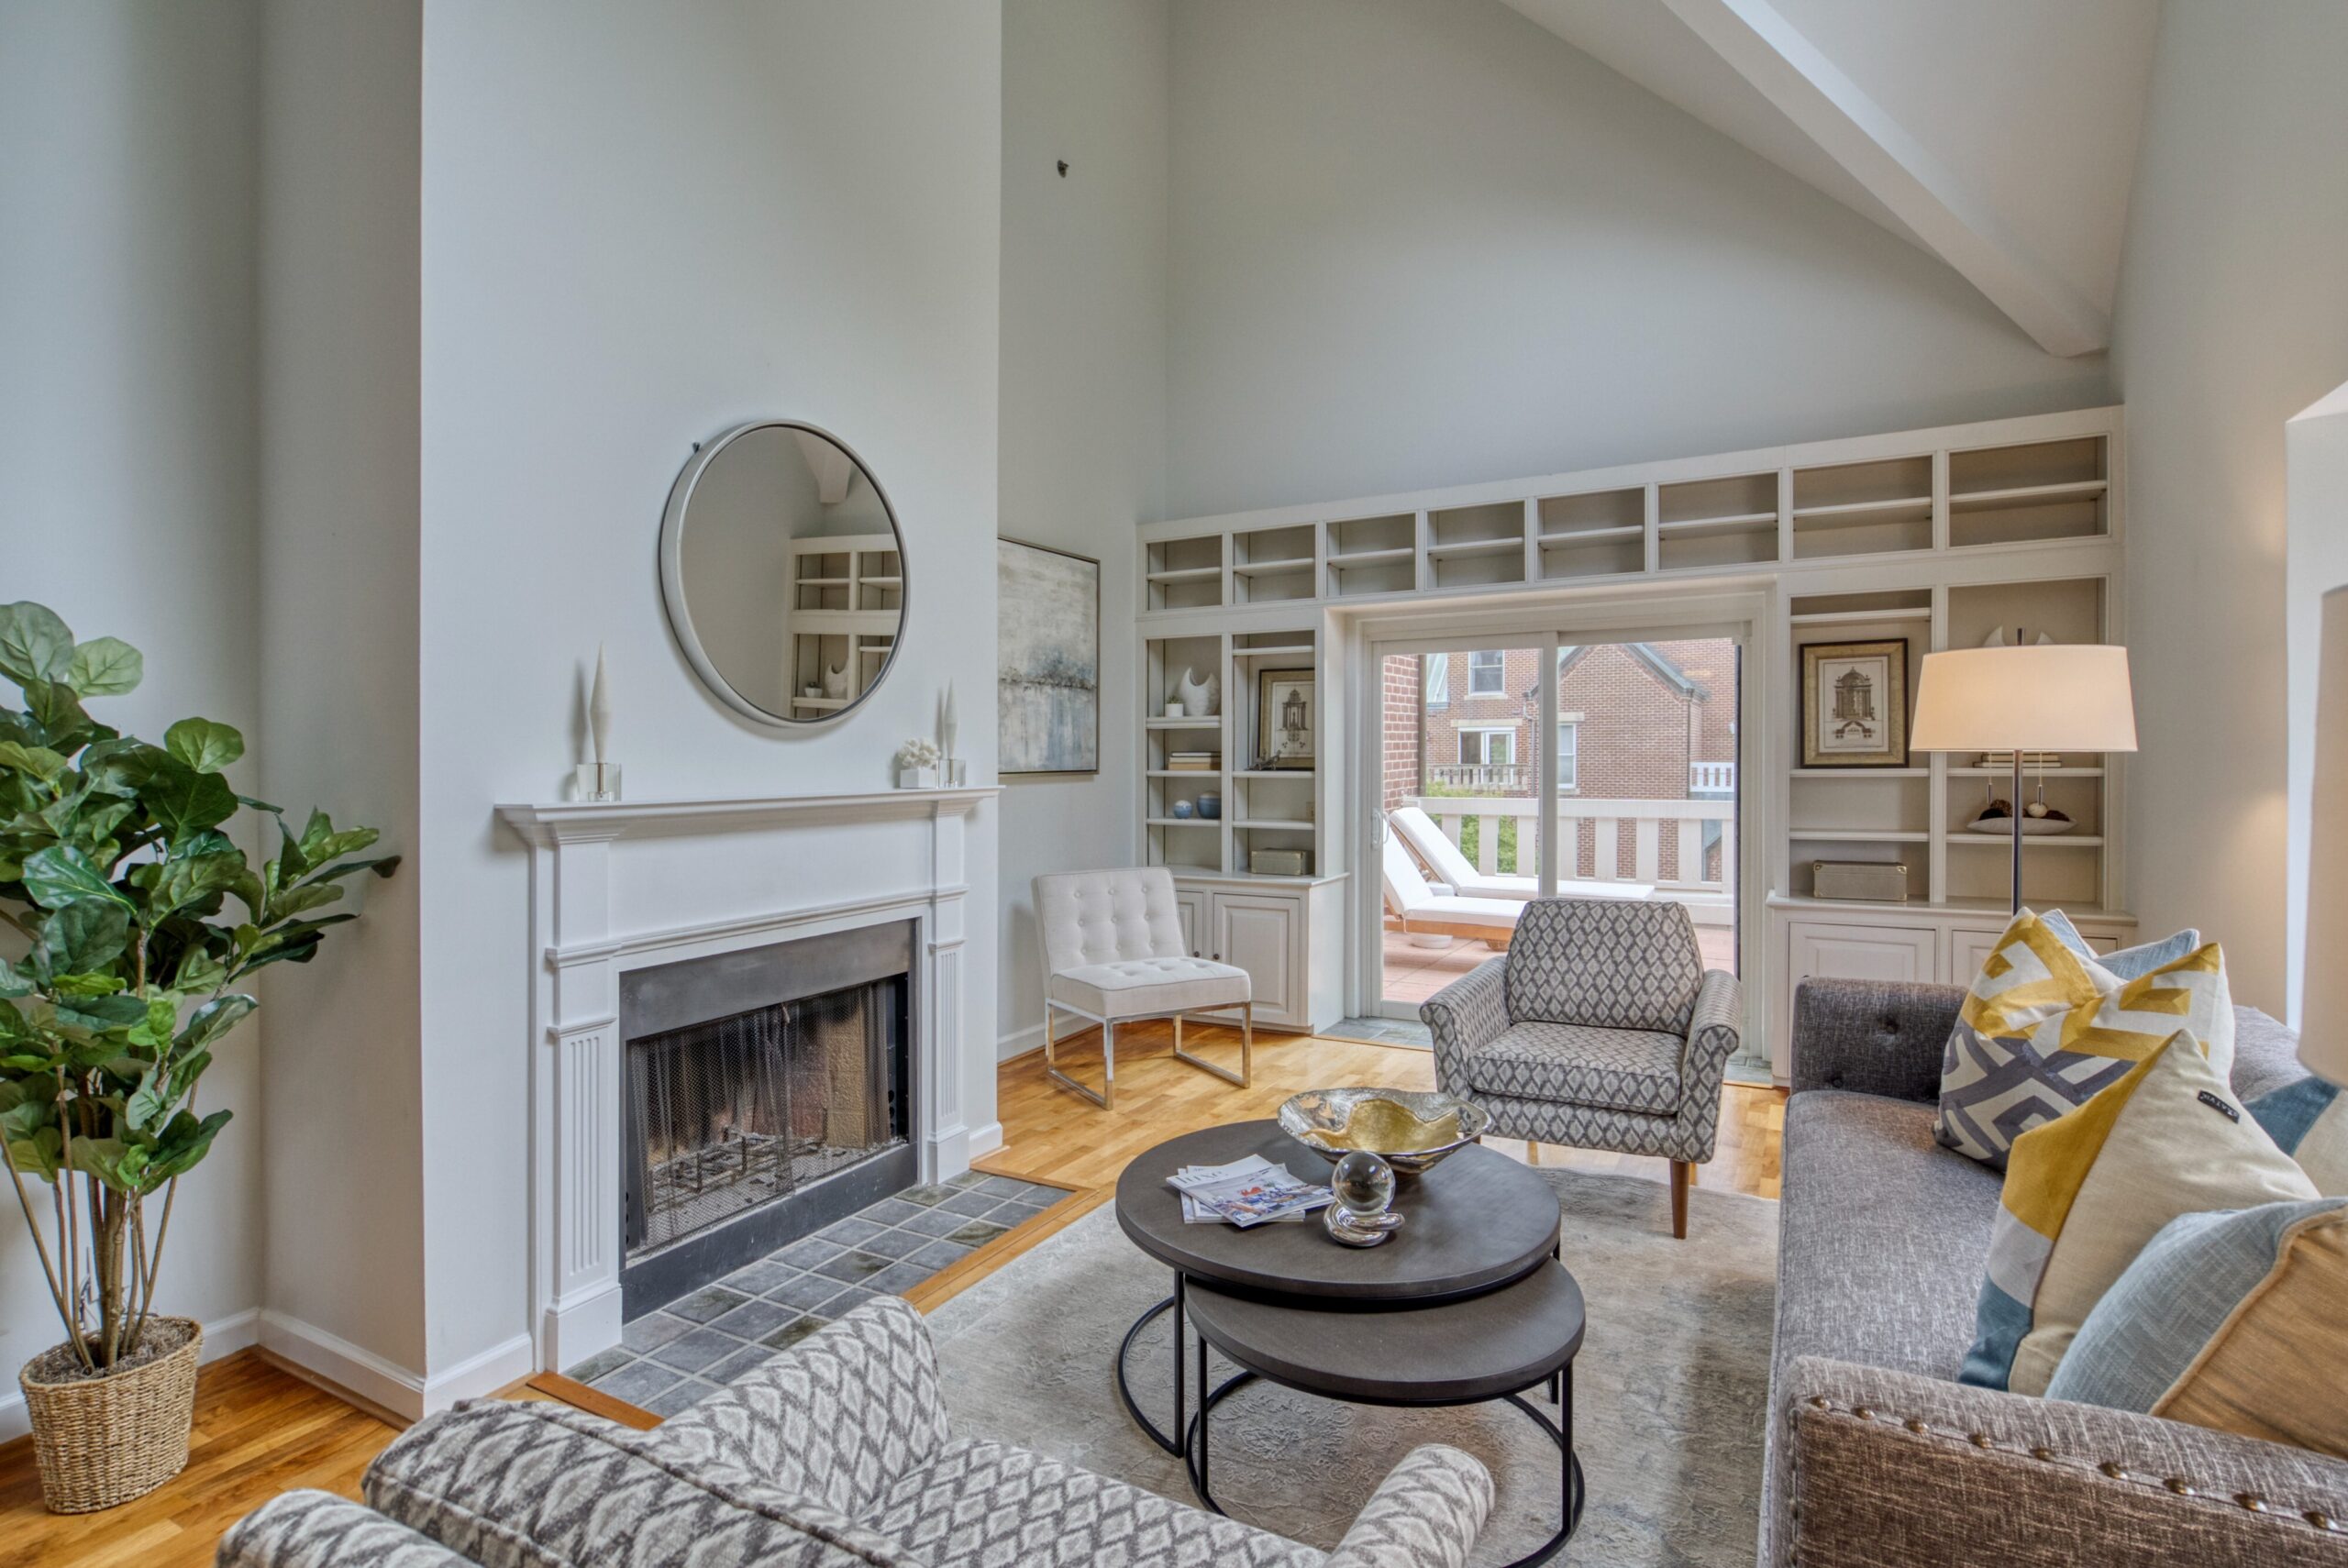 Professional interior photo of 125 N Lee St #401, Alexandria, VA - showing the living room with vaulted ceiling, fireplace, built-in bookshelves at the far wall before the balcony and hardwood floors